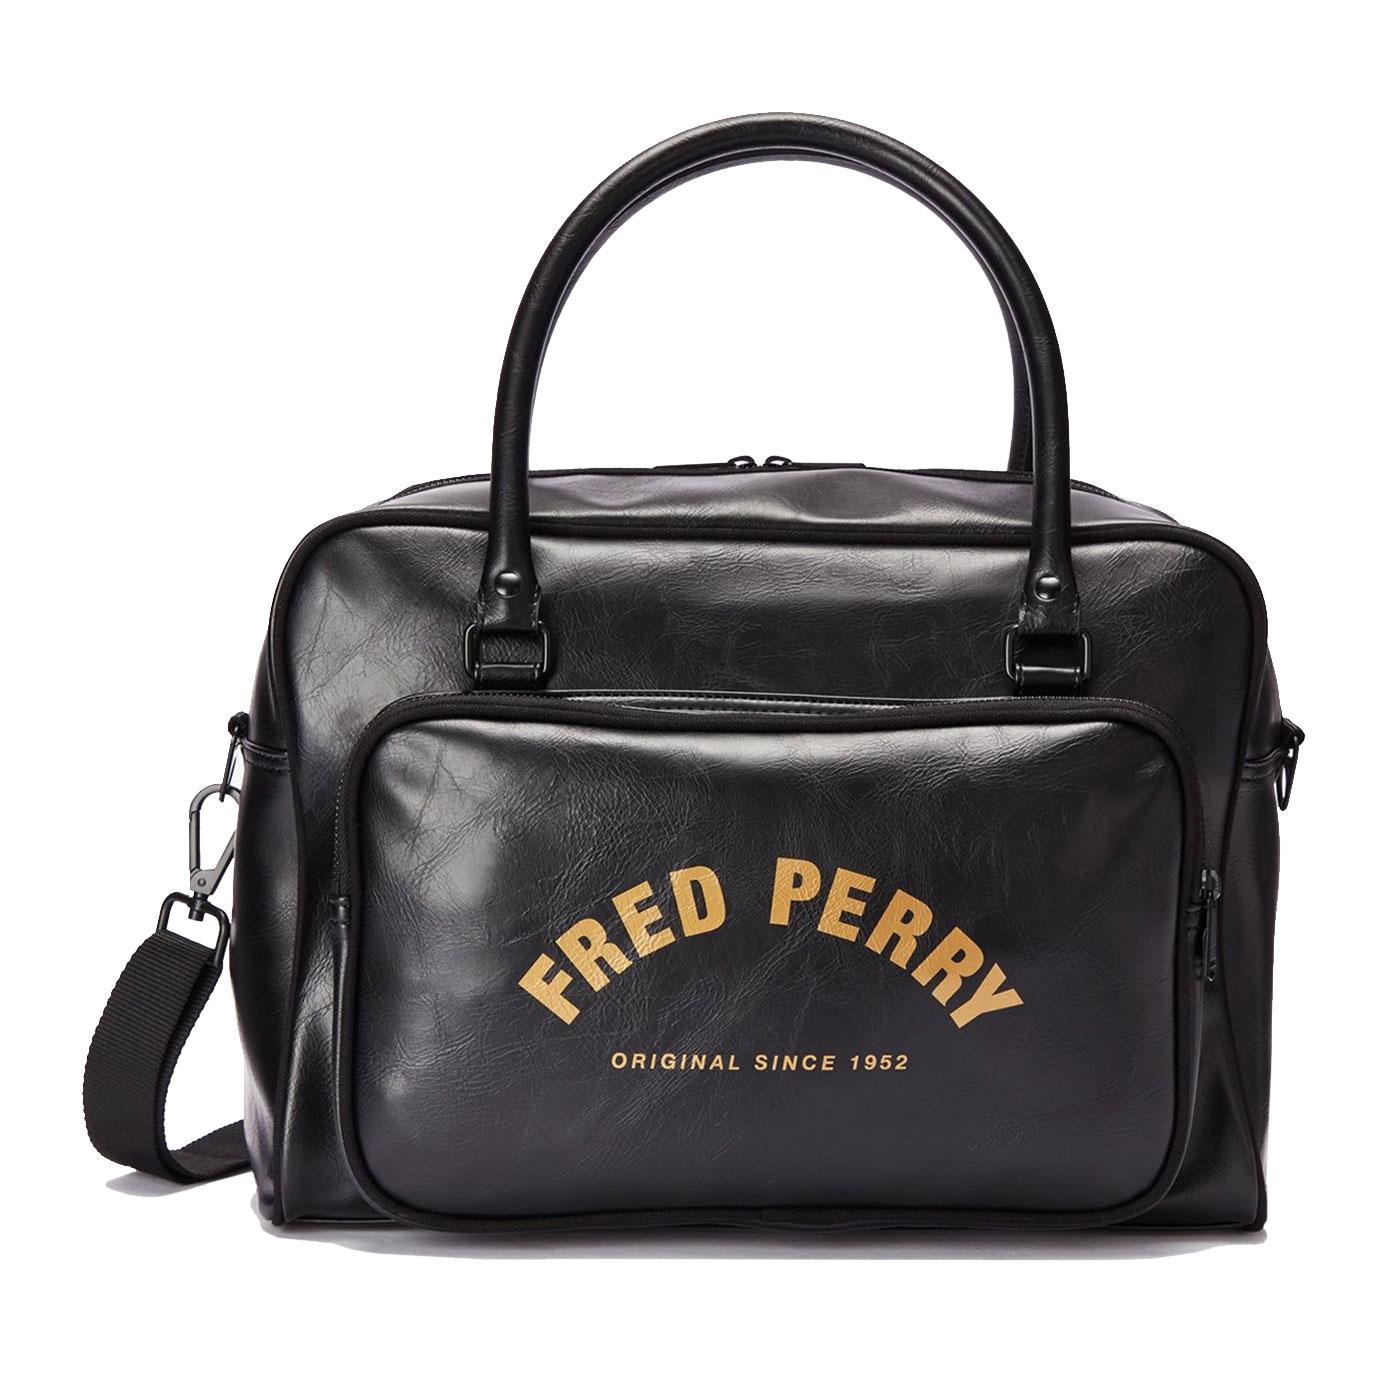 FRED PERRY Retro Arch Branded Holdall Bag - Black